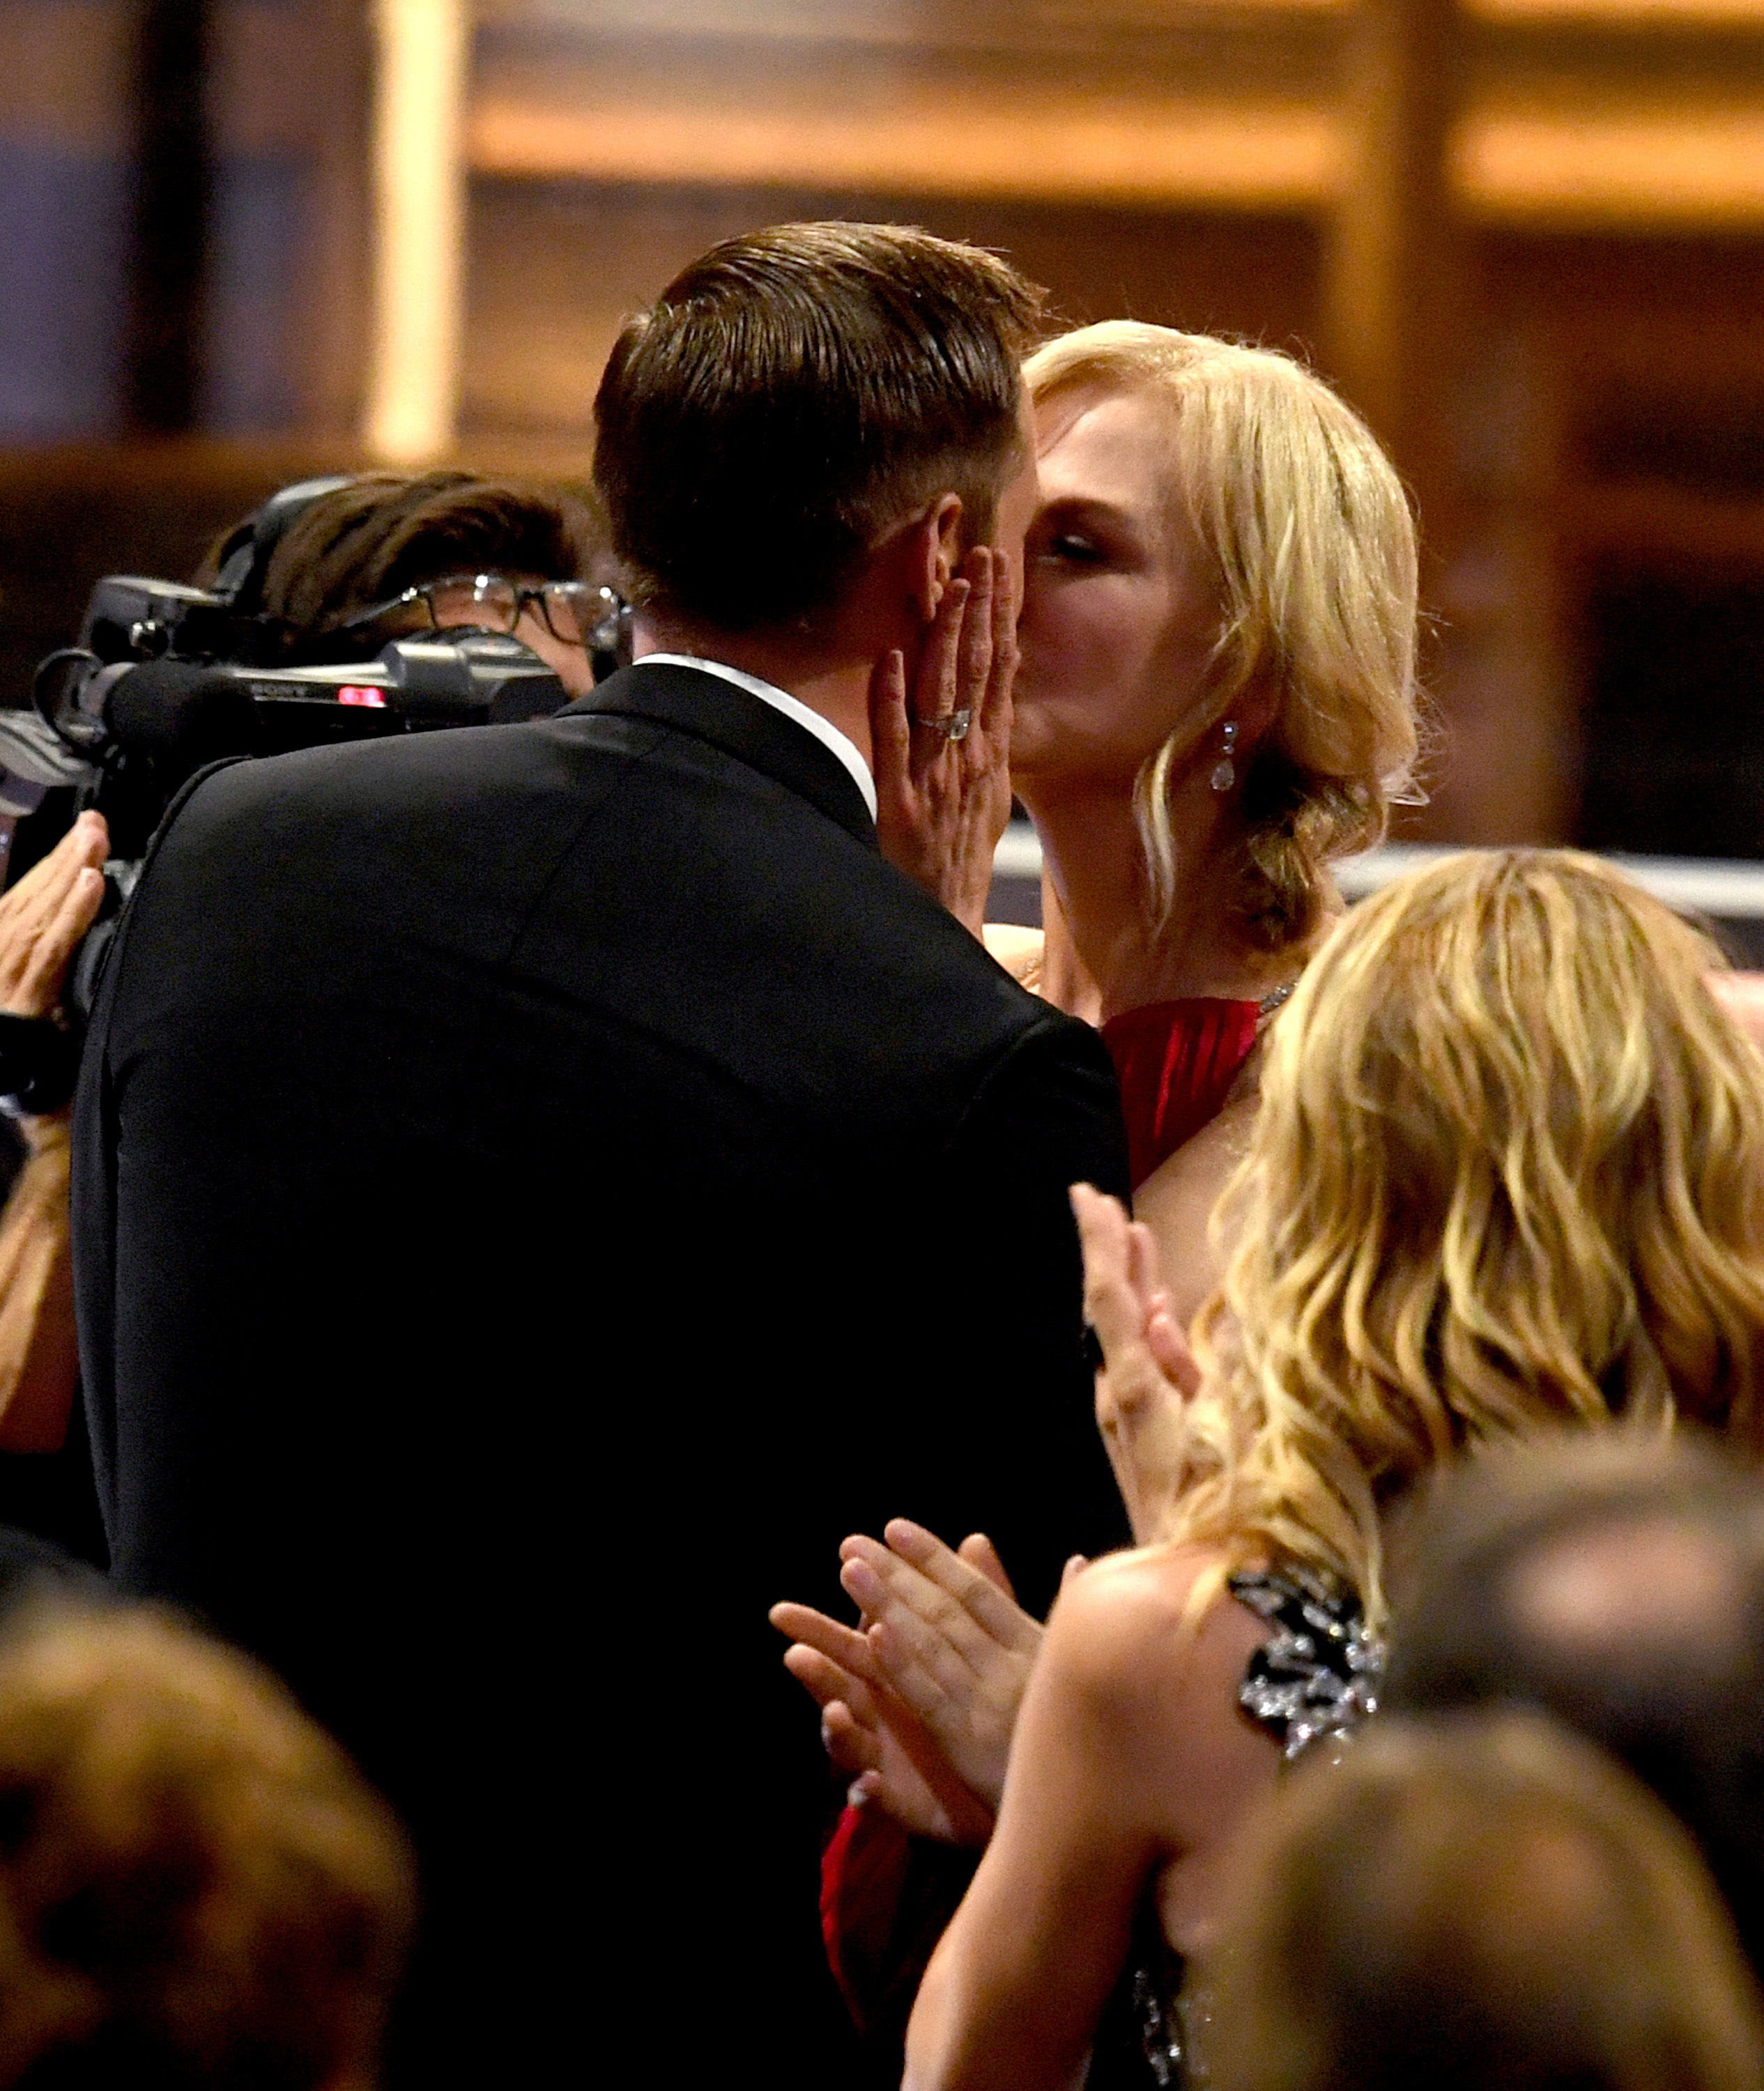 LOS ANGELES, CA - SEPTEMBER 17:  Actor Alexander Skarsgard kisses actress Nicole Kidman as he goes to accept Outstanding Supporting Actor in a Limited Serier or Movie for "Big Little Lies" with actor during the 69th Annual Primetime Emmy Awards at Microsoft Theater on September 17, 2017 in Los Angeles, California.  (Photo by Kevin Winter/Getty Images) (Kevin Winter&mdash;Getty Images)